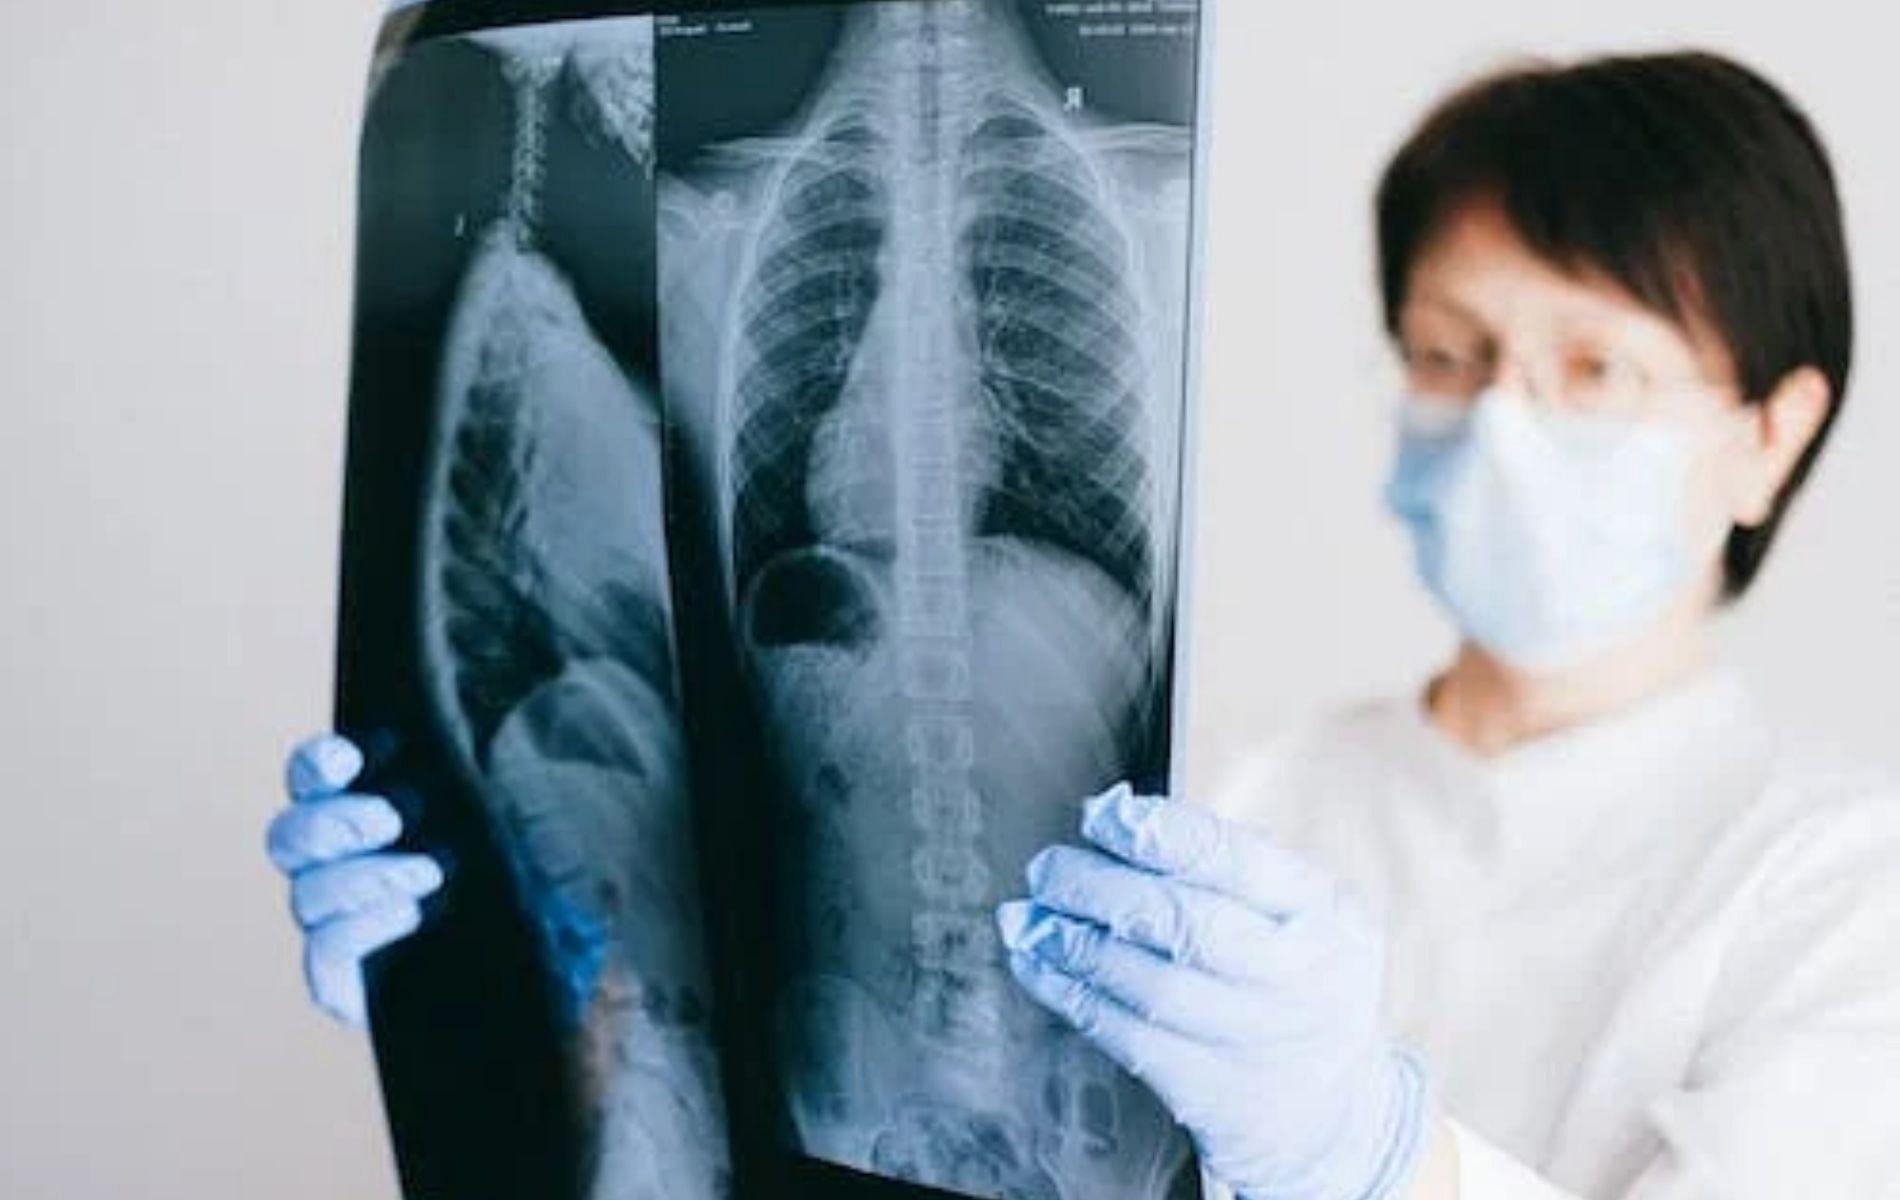 An emergency tracheotomy was performed on Paul Alexander to remove the lung congestion (Image via Pexels)